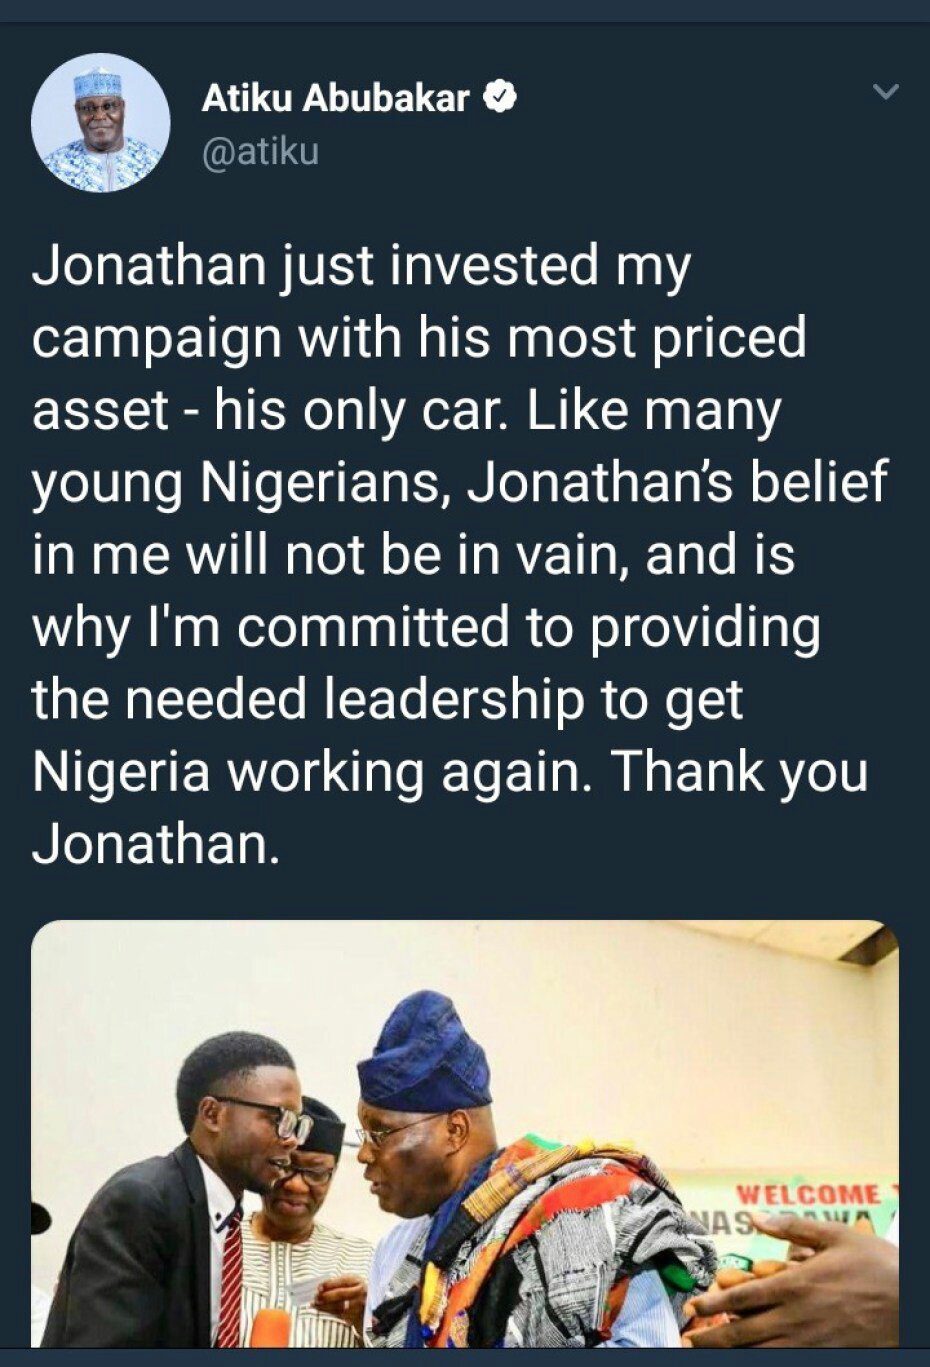 Atiku Shares Photo Of A Young Nigerian Man Who Contributed His ‘Only Car’ To The Atiku Campaign